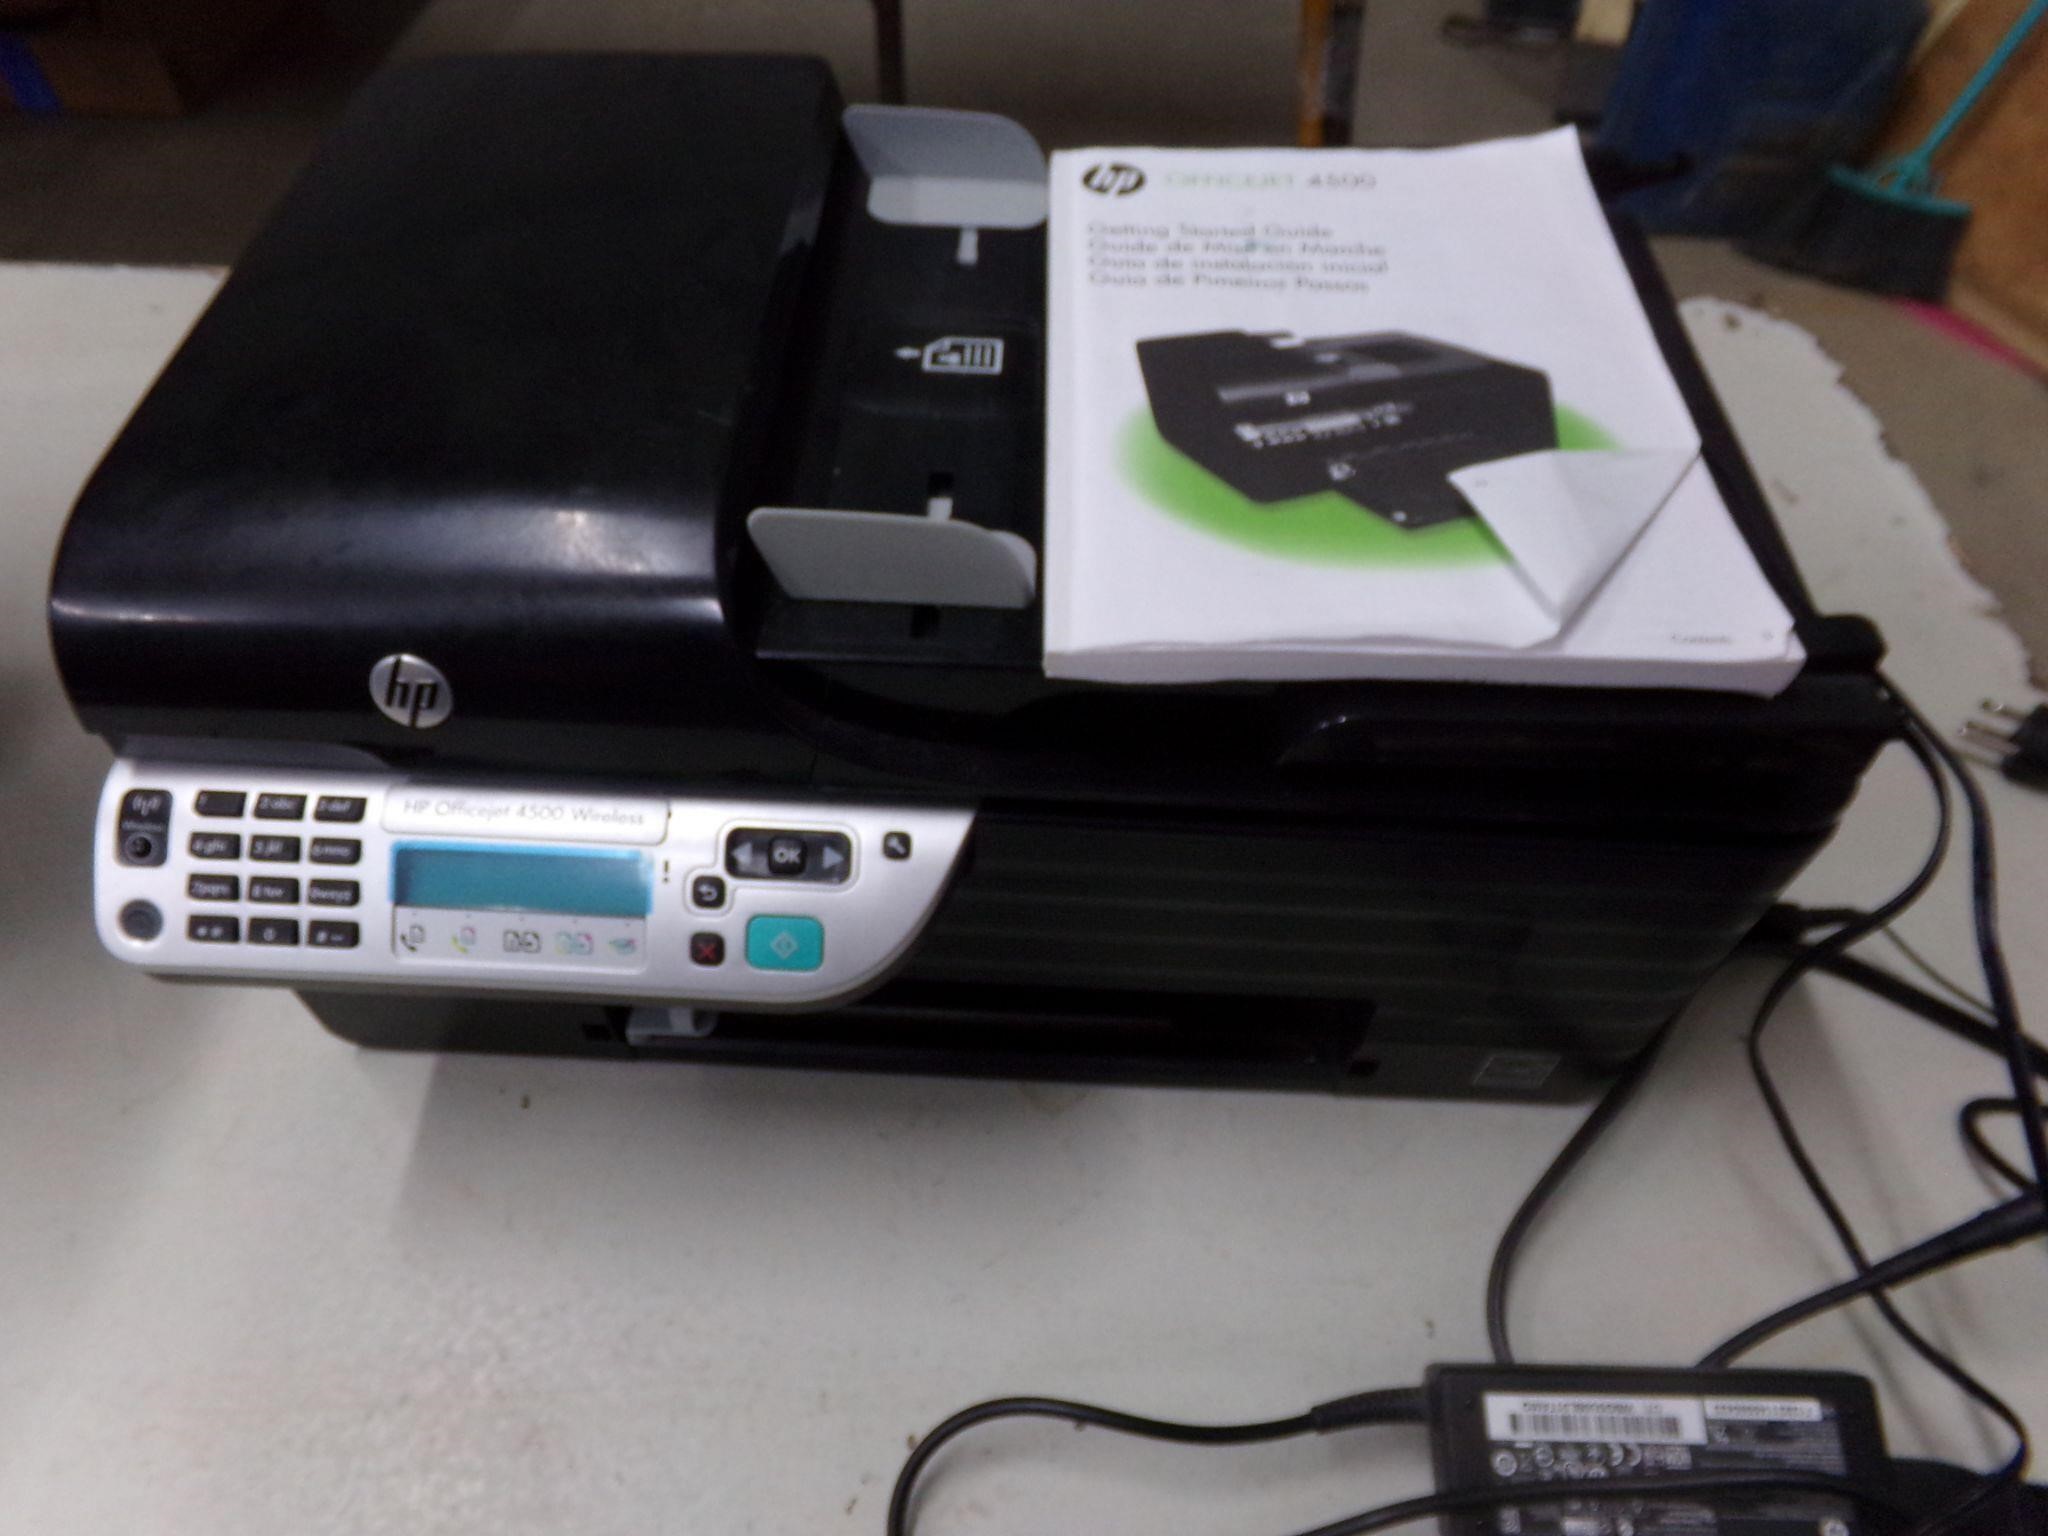 HP office jet wireless printer and fax